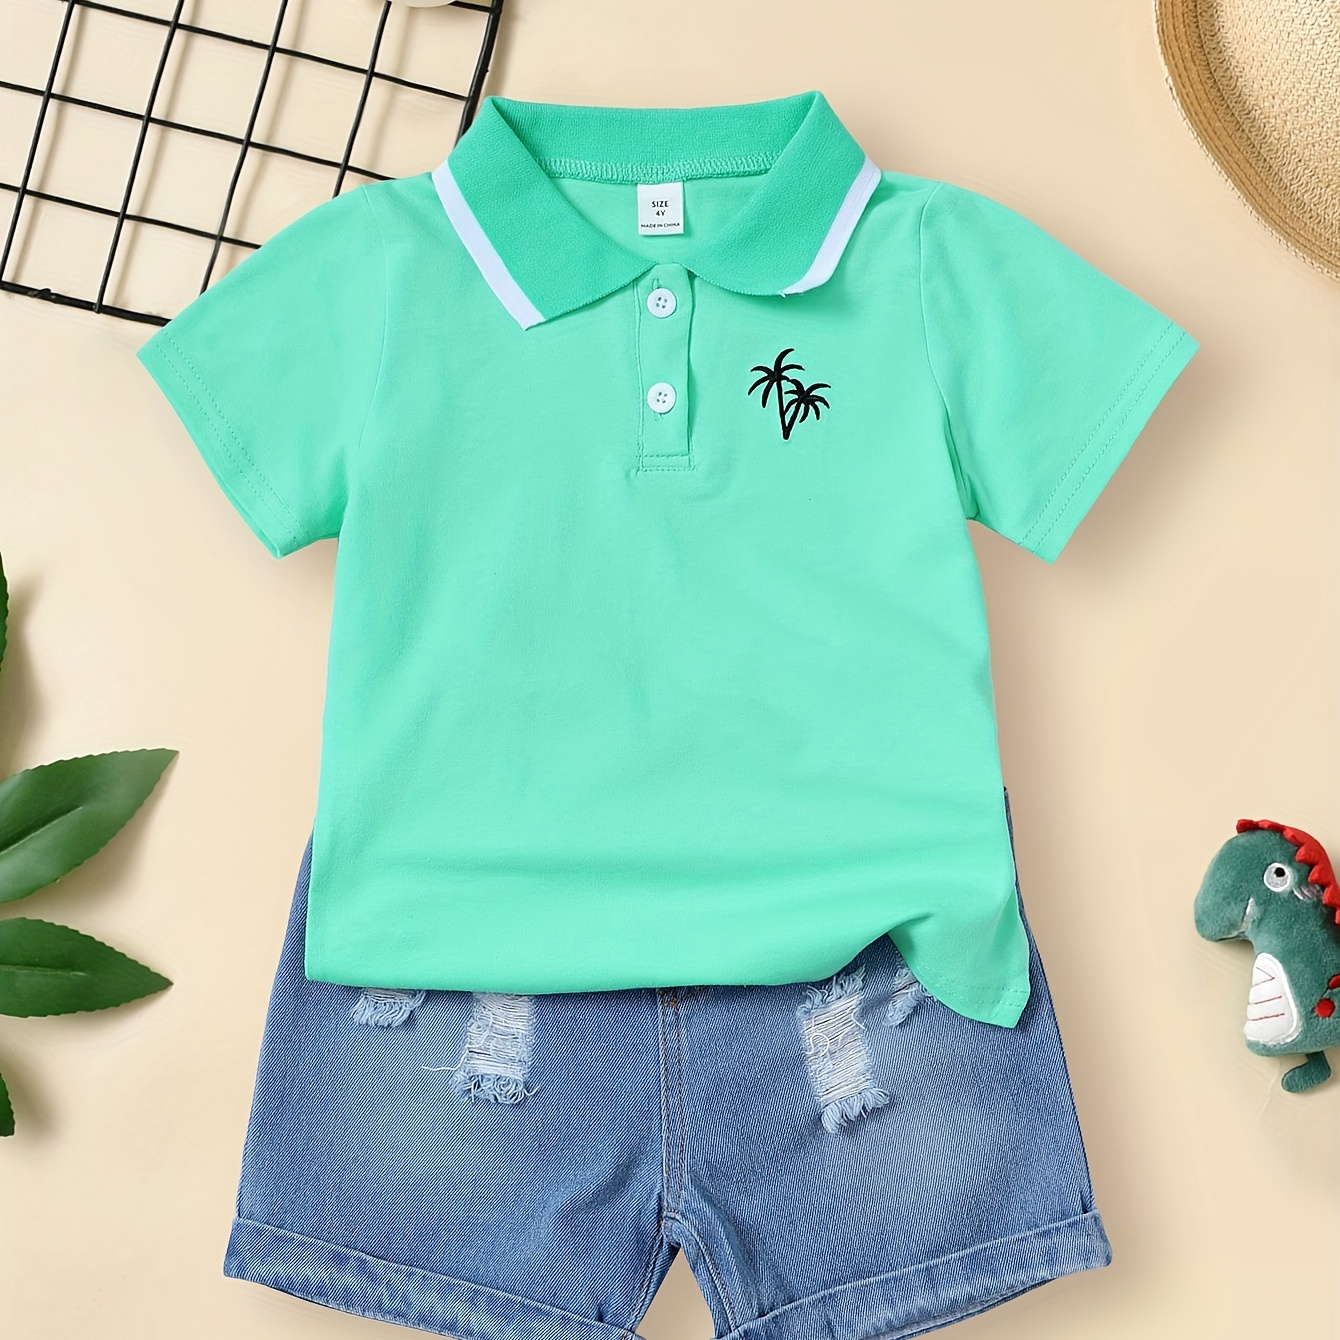 

Boy's Palm Tree Pattern Cute Lapel Shirt, Casual Short Sleeve Breathable Comfy Versatile Top Shirt For Summer Holiday